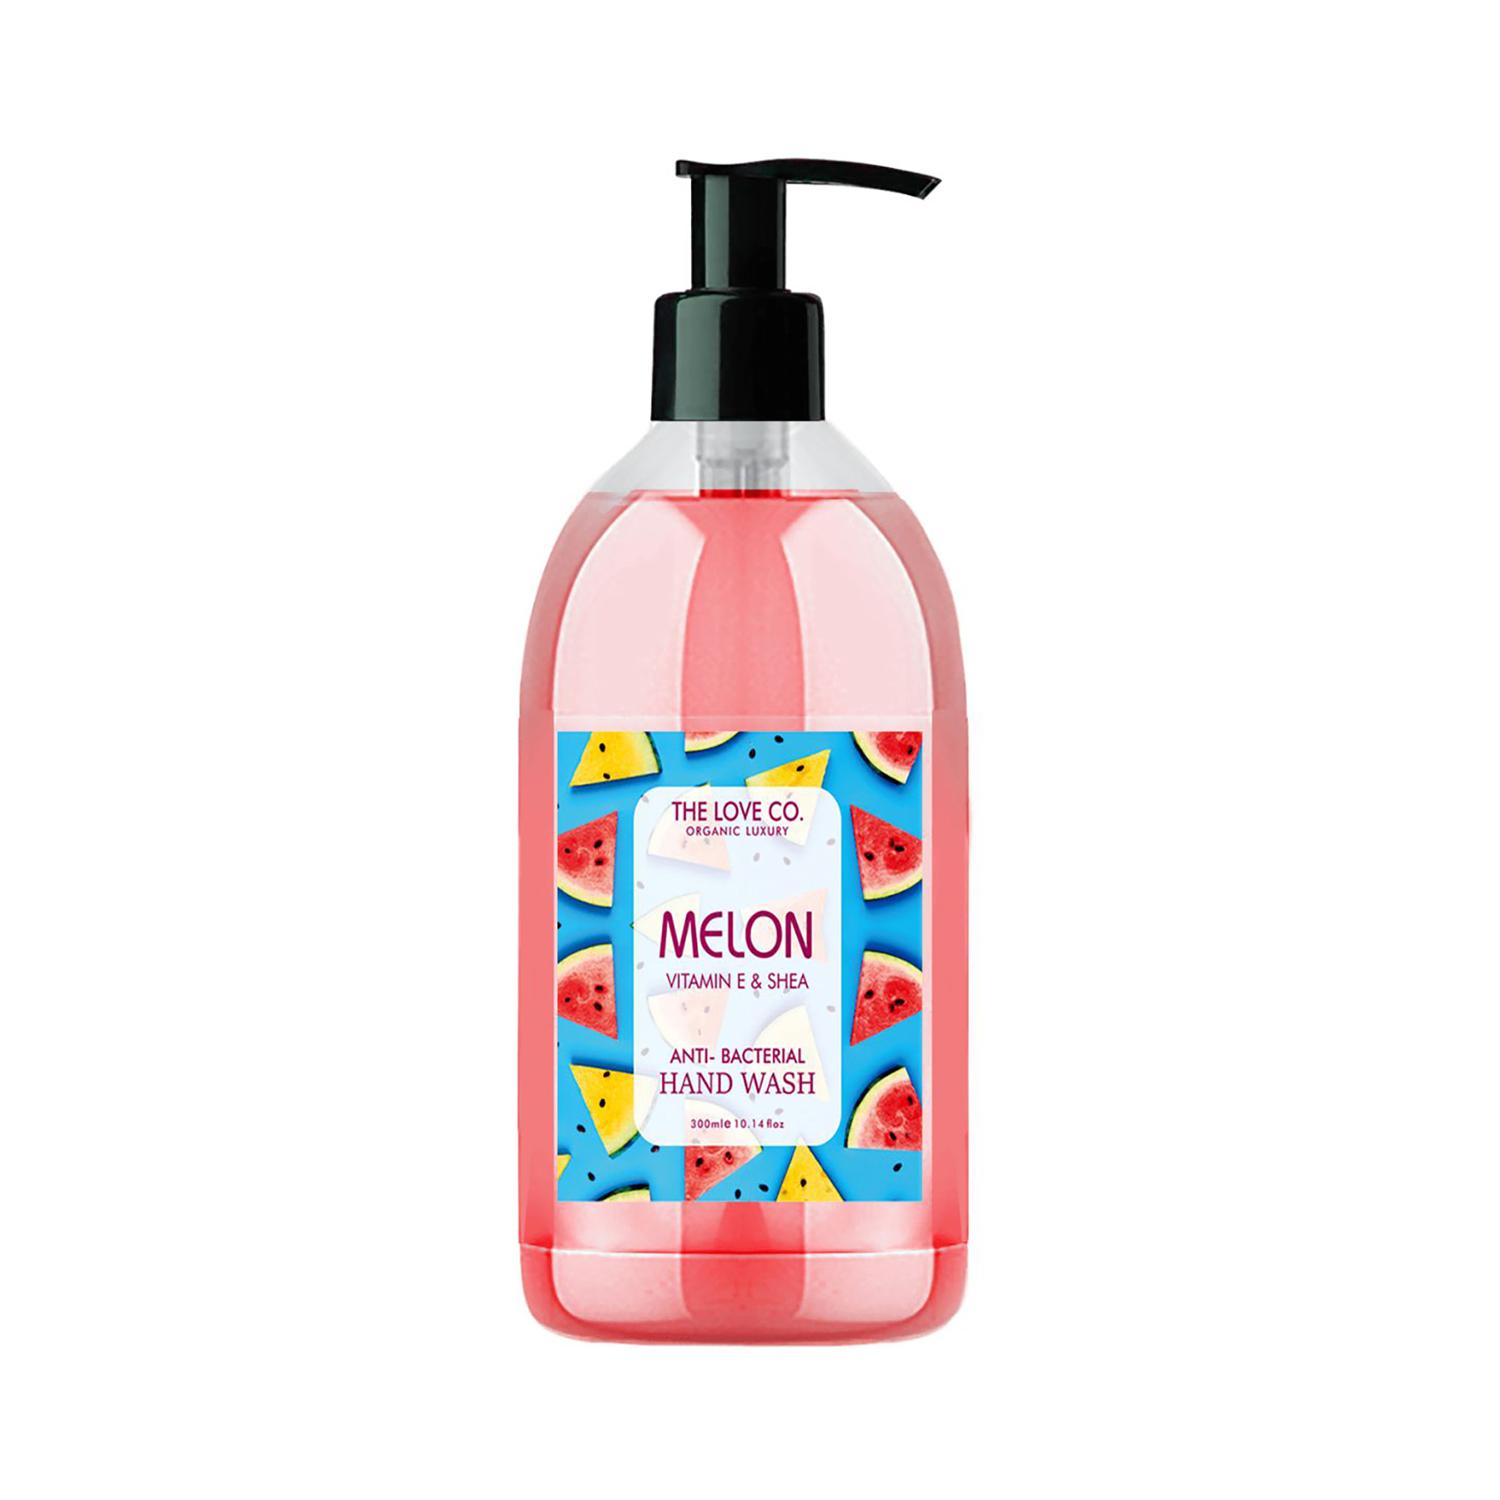 THE LOVE CO. | THE LOVE CO. Melon Hand Wash For Moisturized Hands (300ml)